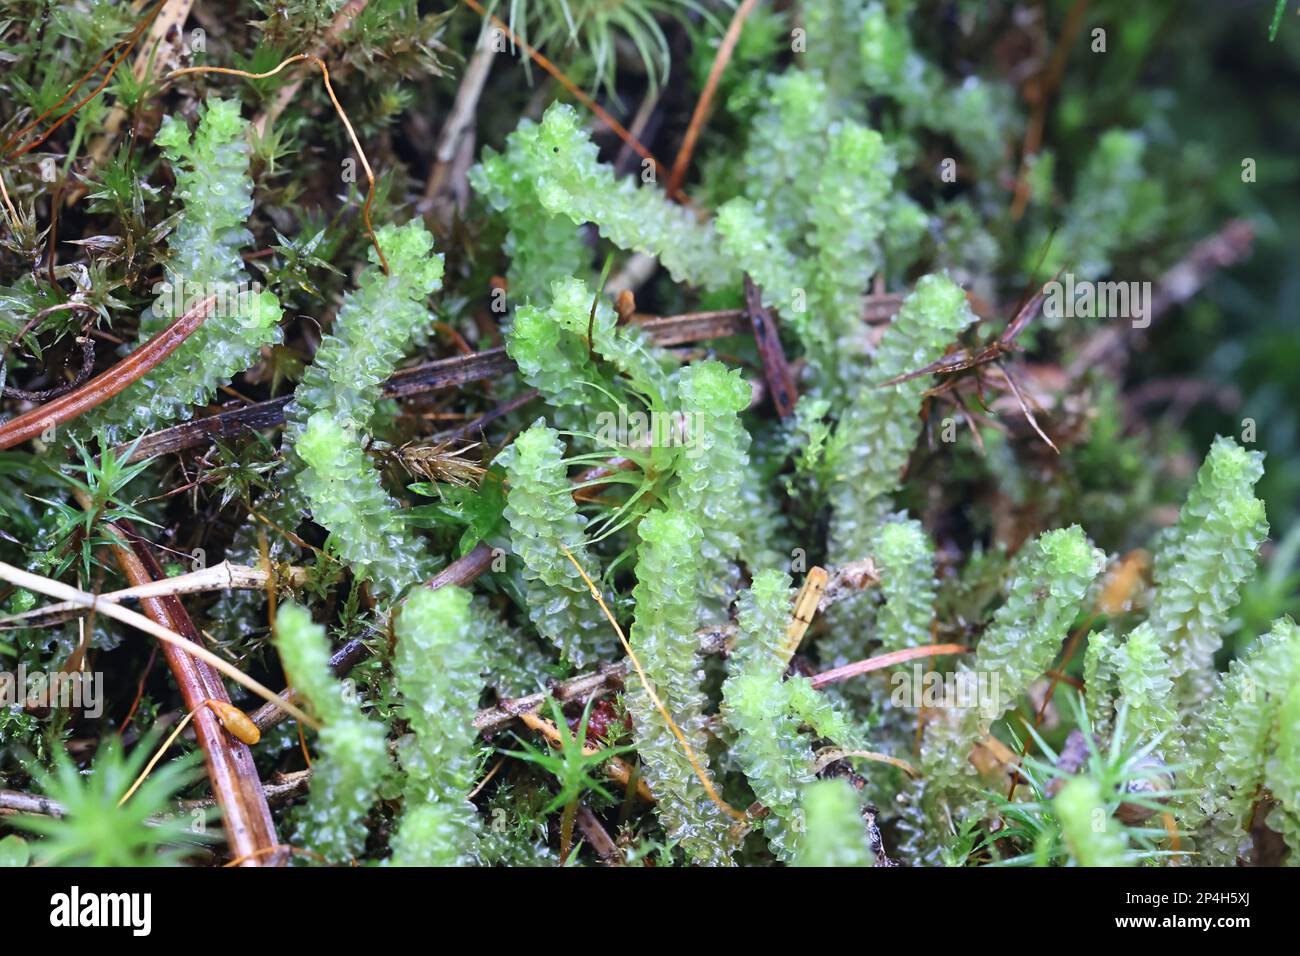 Barbilophozia lycopodioides, commonly known as Greater Pawwort, liverwort from Finland Stock Photo